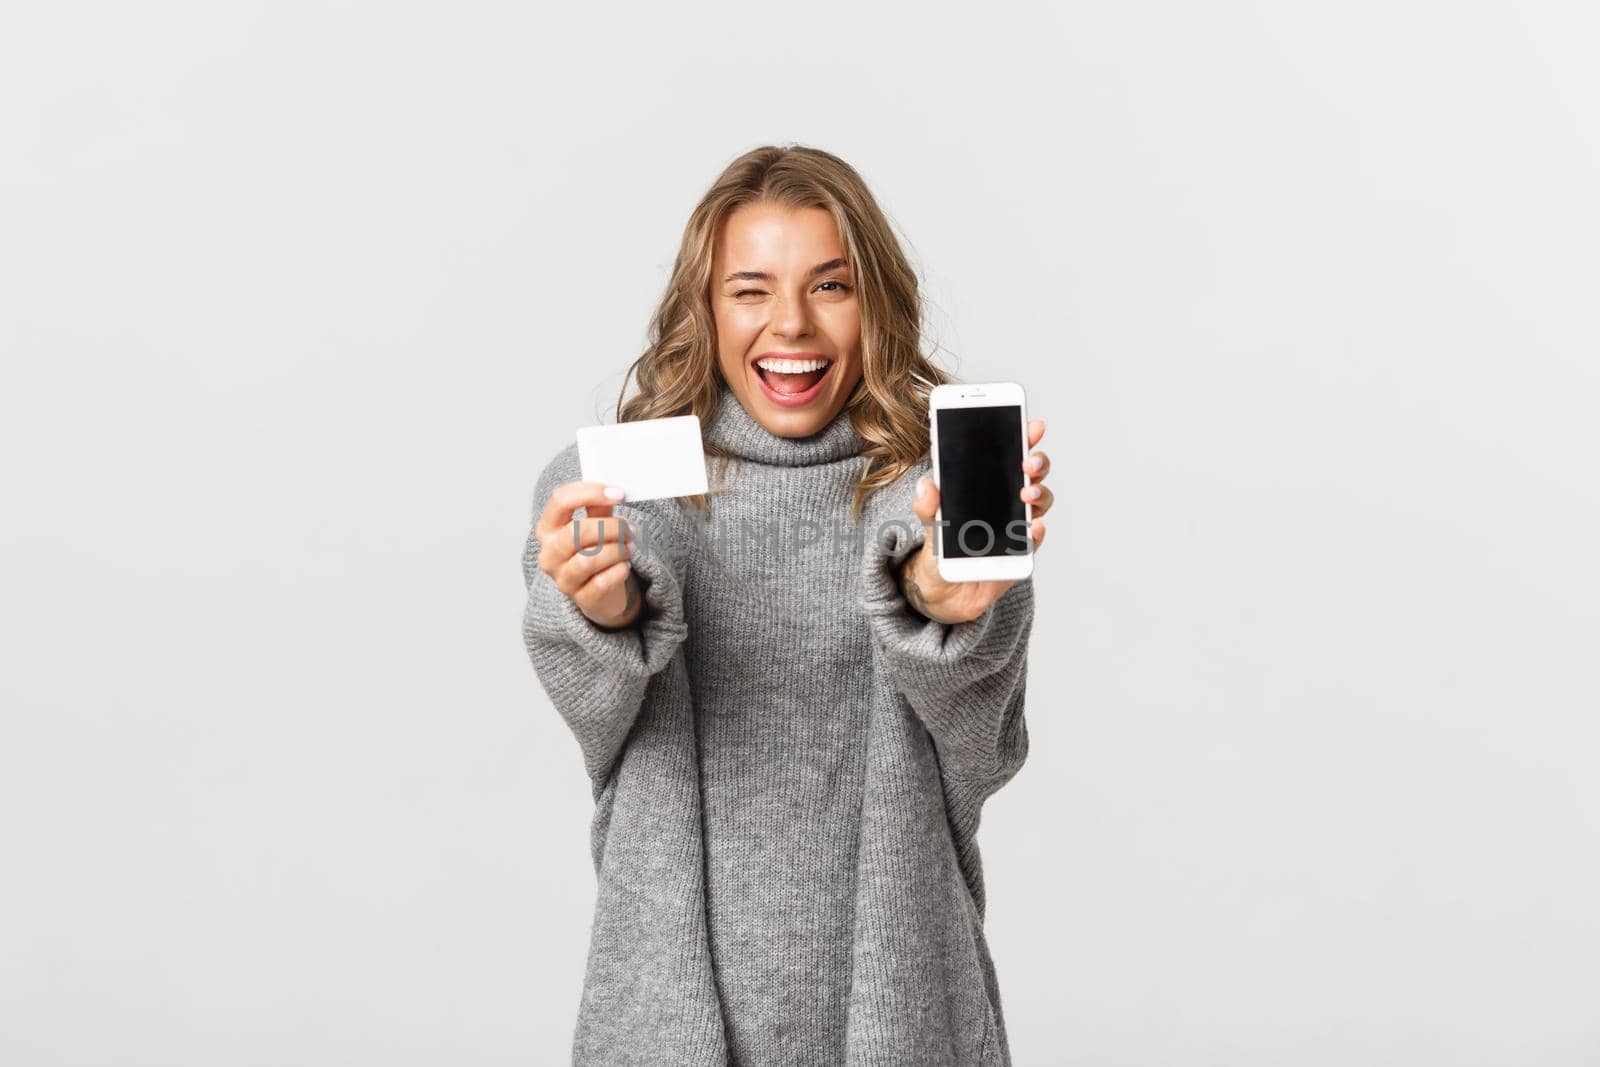 Studio shot of attractive blond girl in grey sweater, showing mobile phone screen and credit card, looking happy, standing over white background.